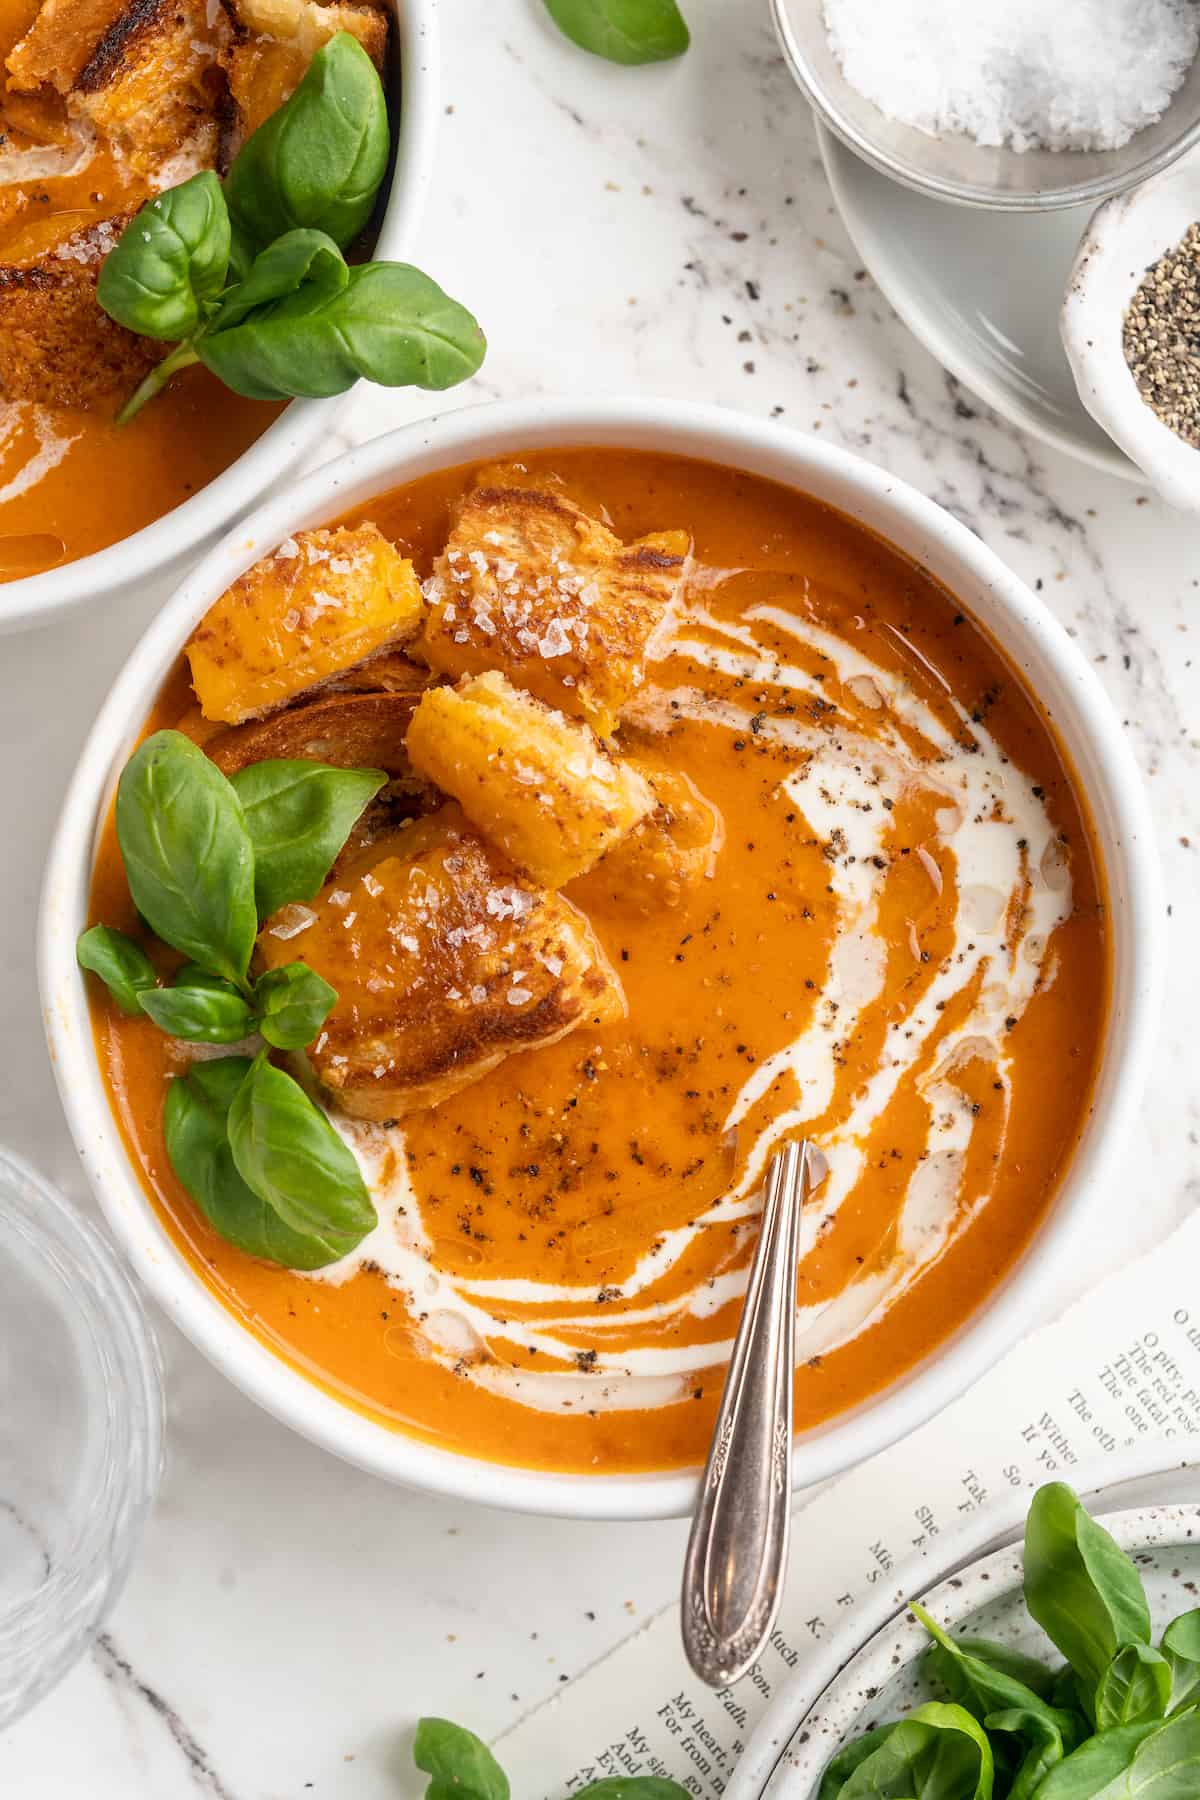 Overhead view of creamy tomato soup with cheesy croutons in bowl